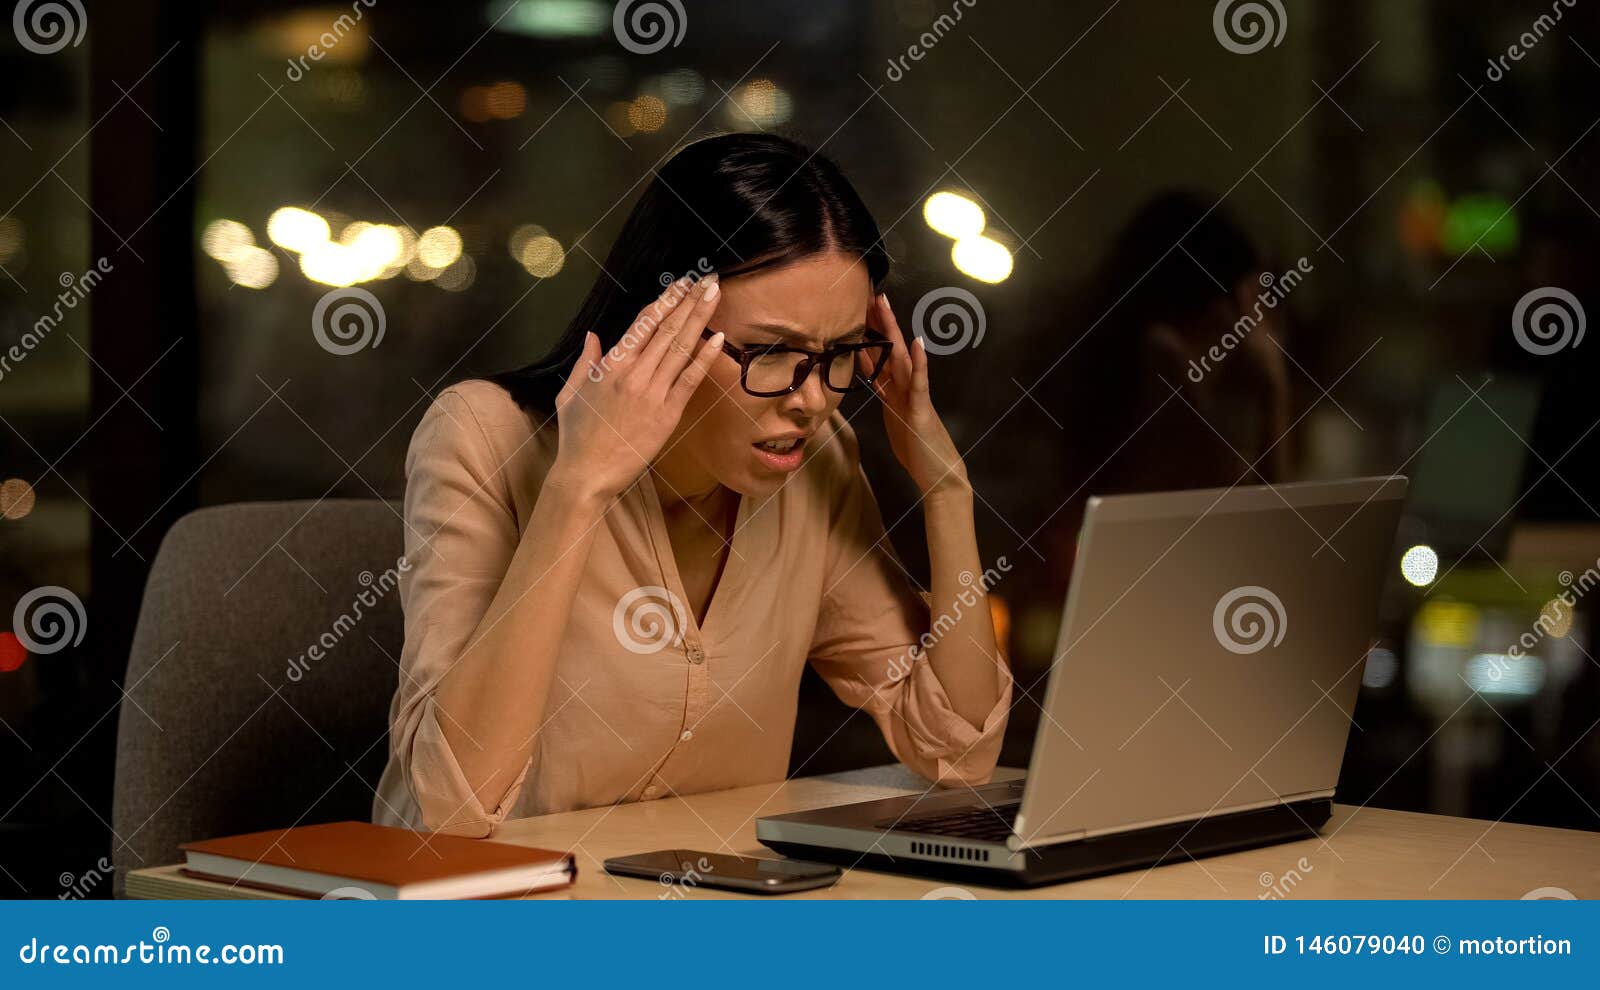 frustrated woman working laptop, nervous about mistakes, stressful job, problem